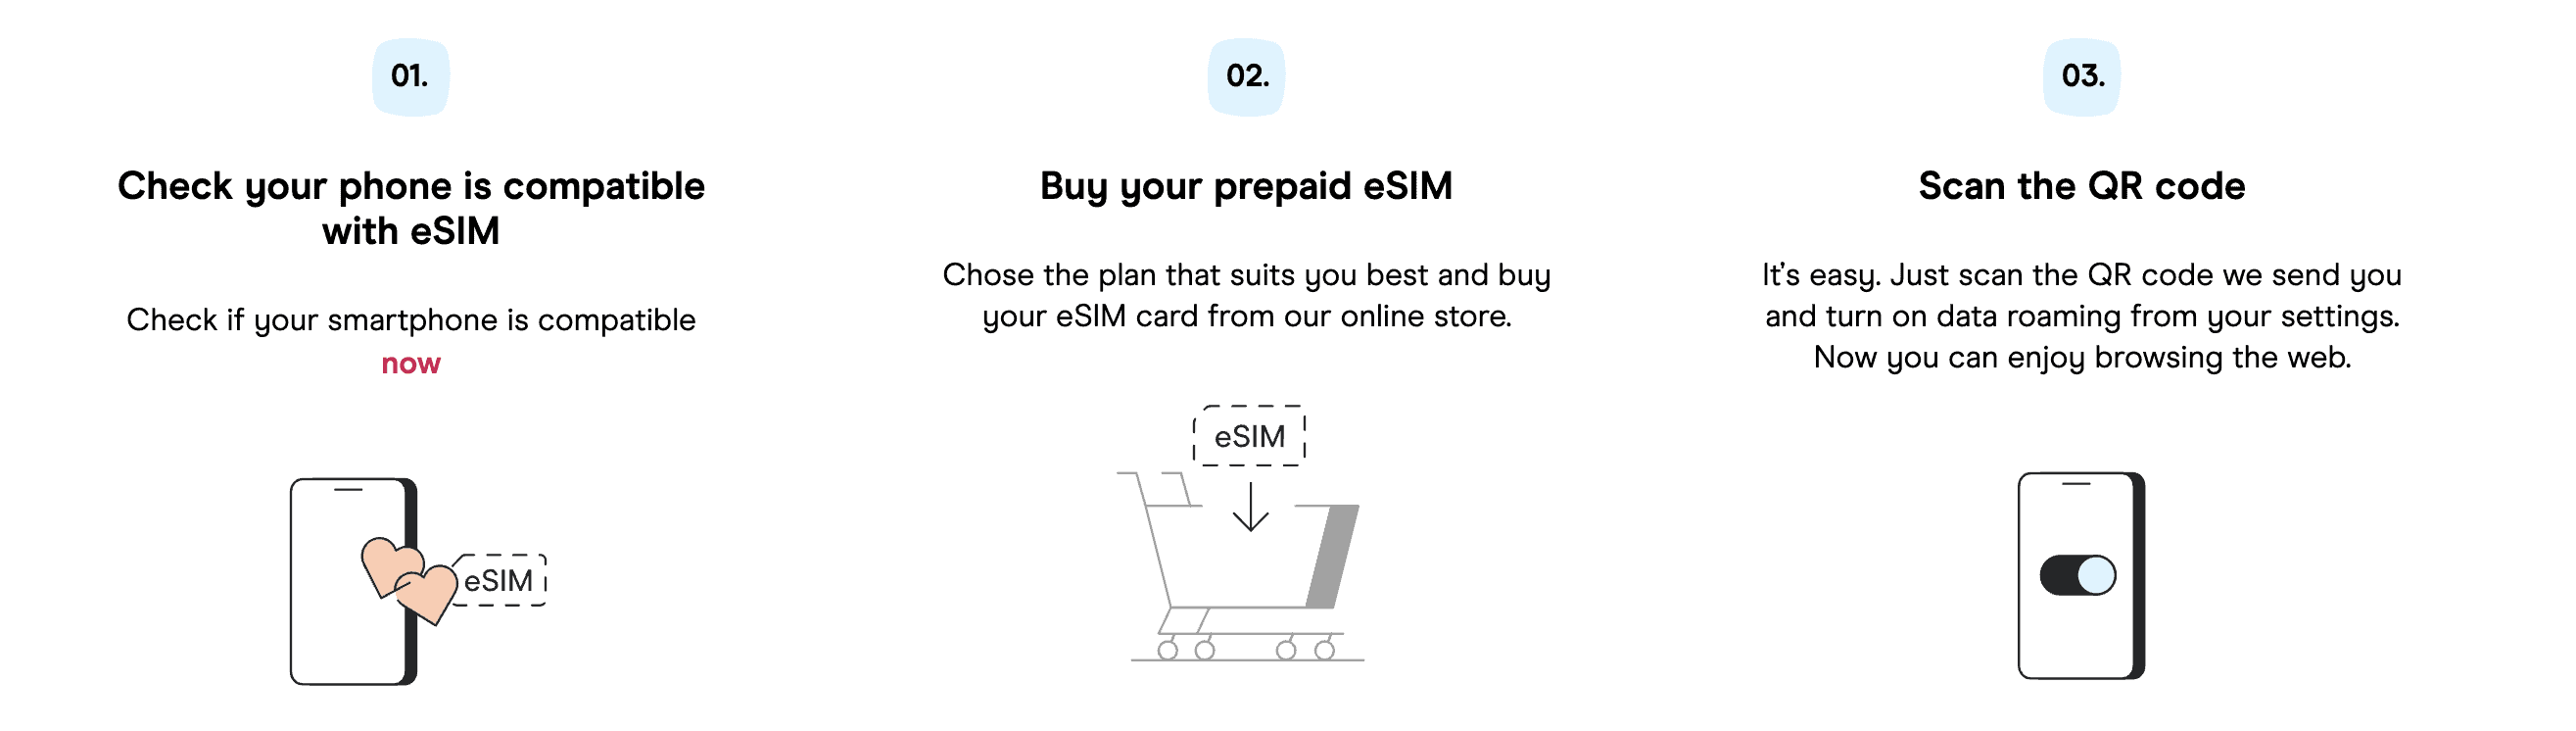 a Holafly eSIM screenshot from their website with instructions